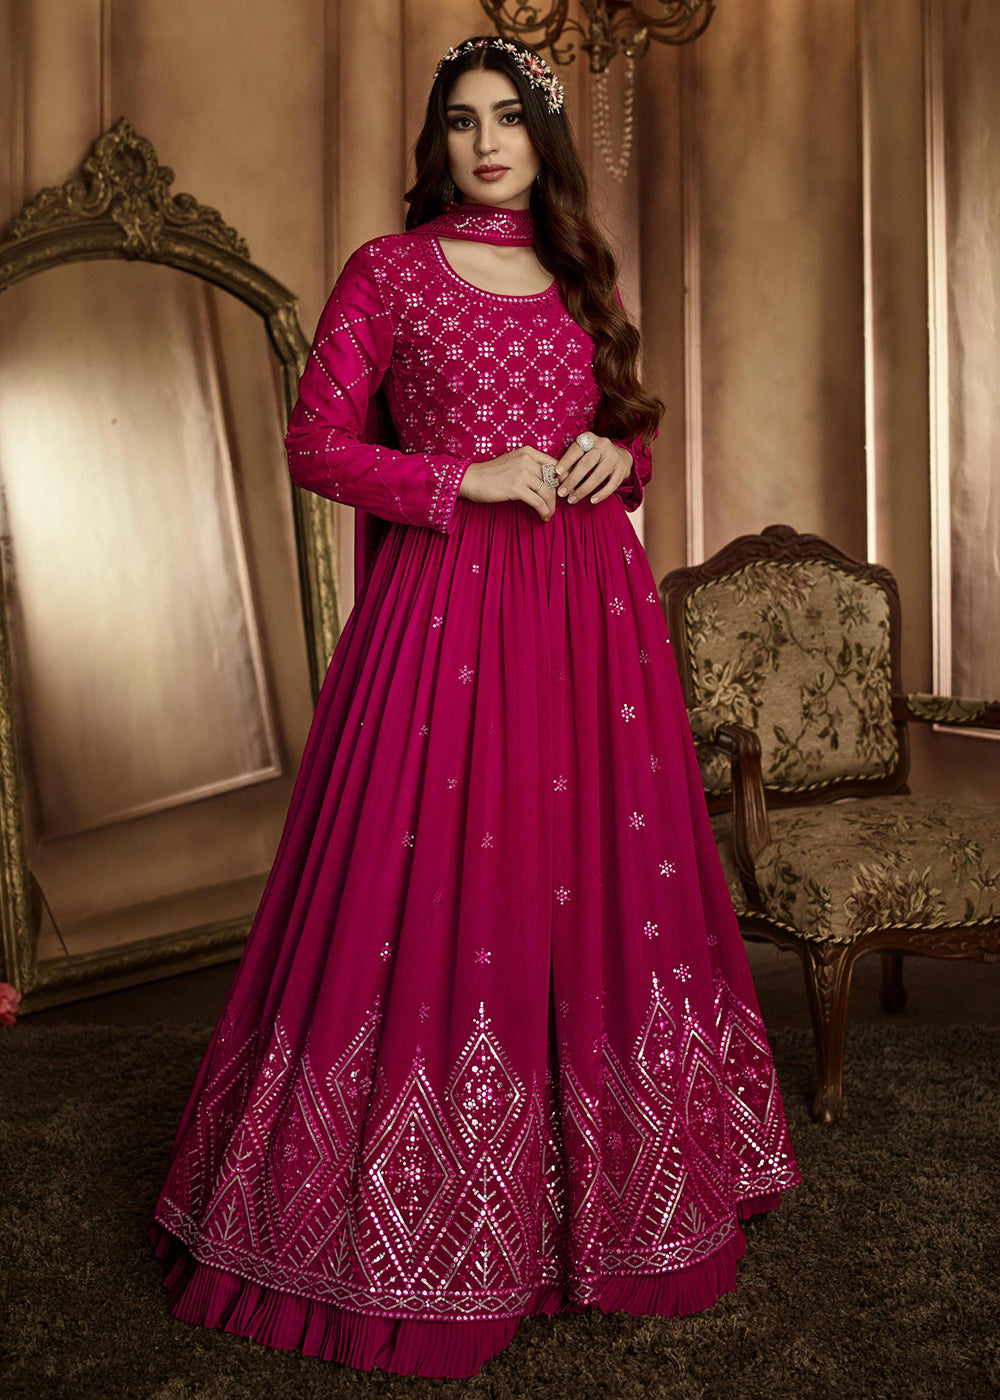 Buy Now Engrossing Rani Pink Sequins Wedding Festive Anarkali Suit Online in USA, UK, Australia, New Zealand, Canada & Worldwide at Empress Clothing. 